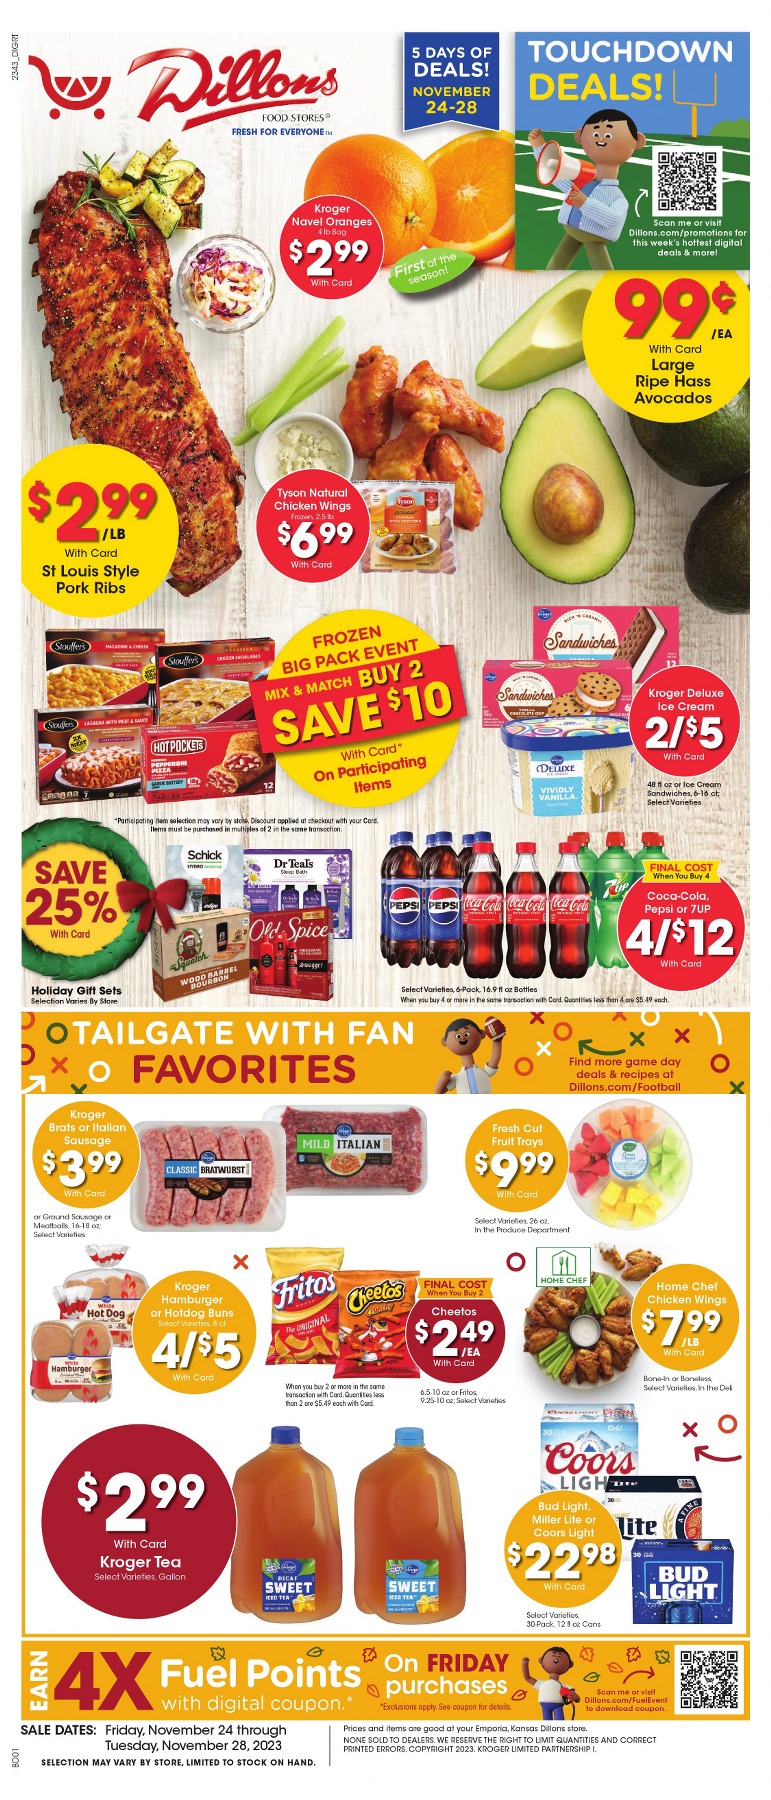 Dillons Weekly Ad December 13 to December 19, 2023 1 – dillons ad 1 2